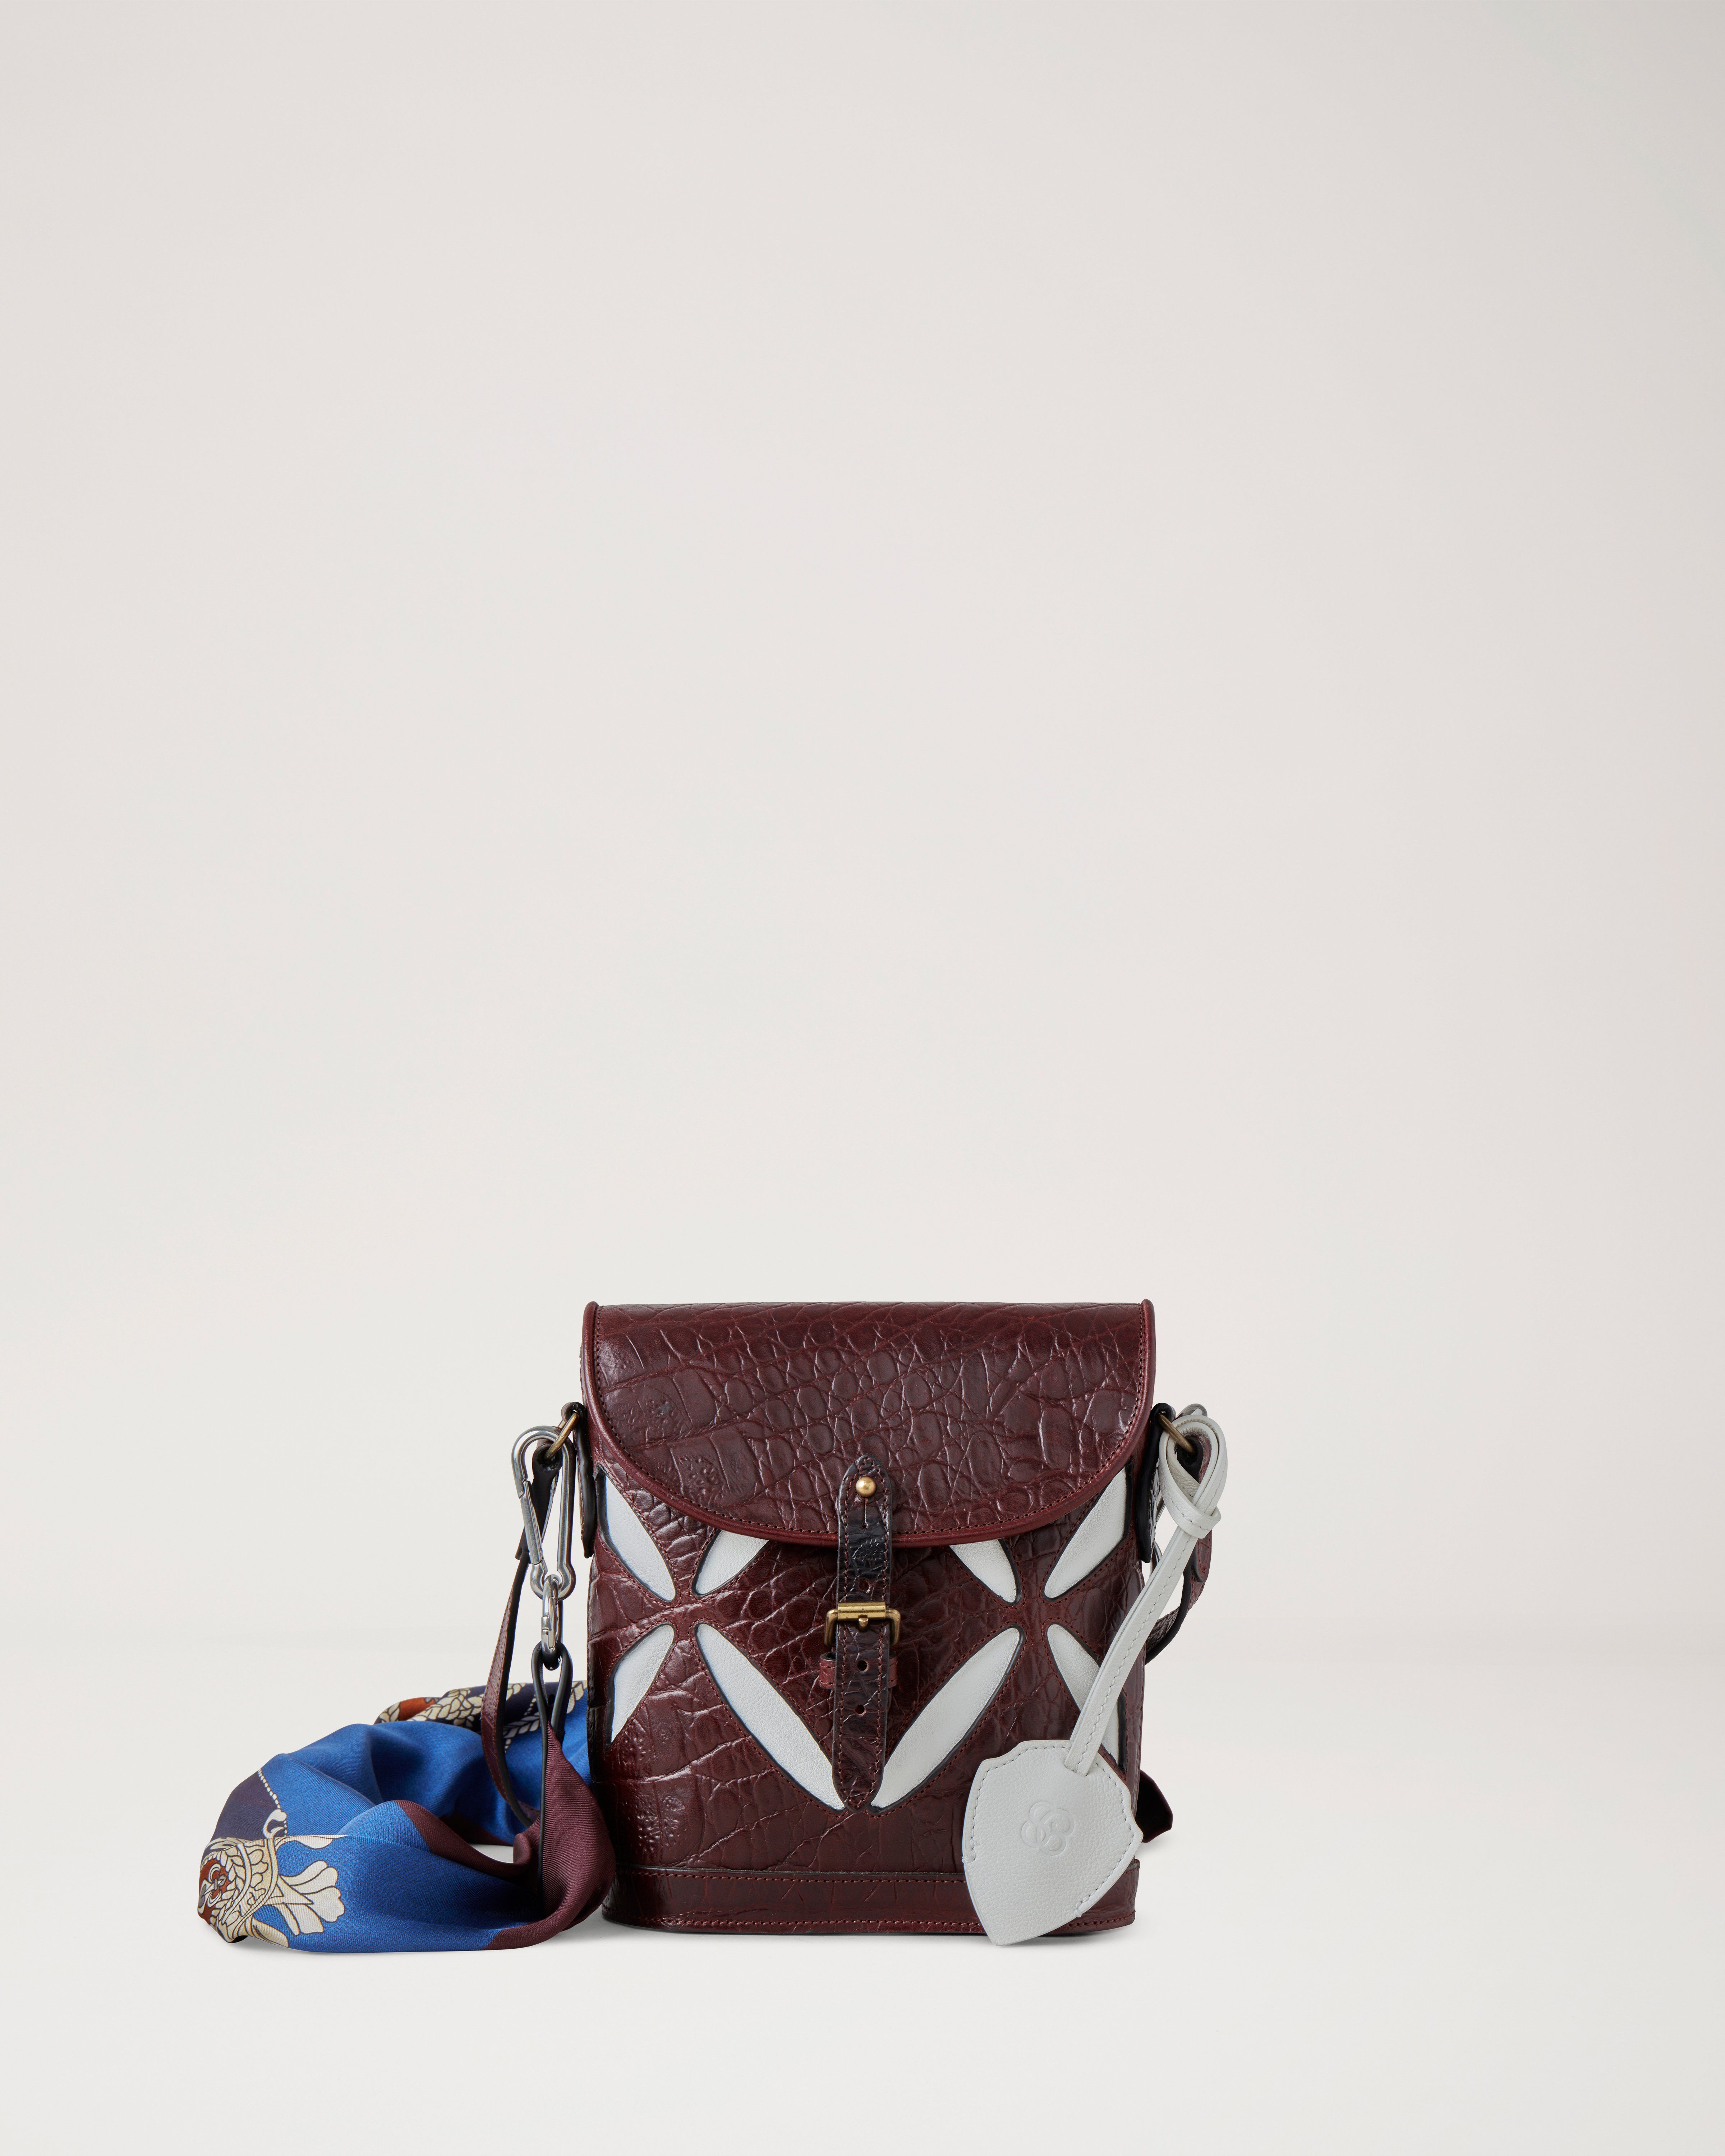 Satchel Slash Handbag in Teak Leather from the Mulberry x Stefan Cooke collection